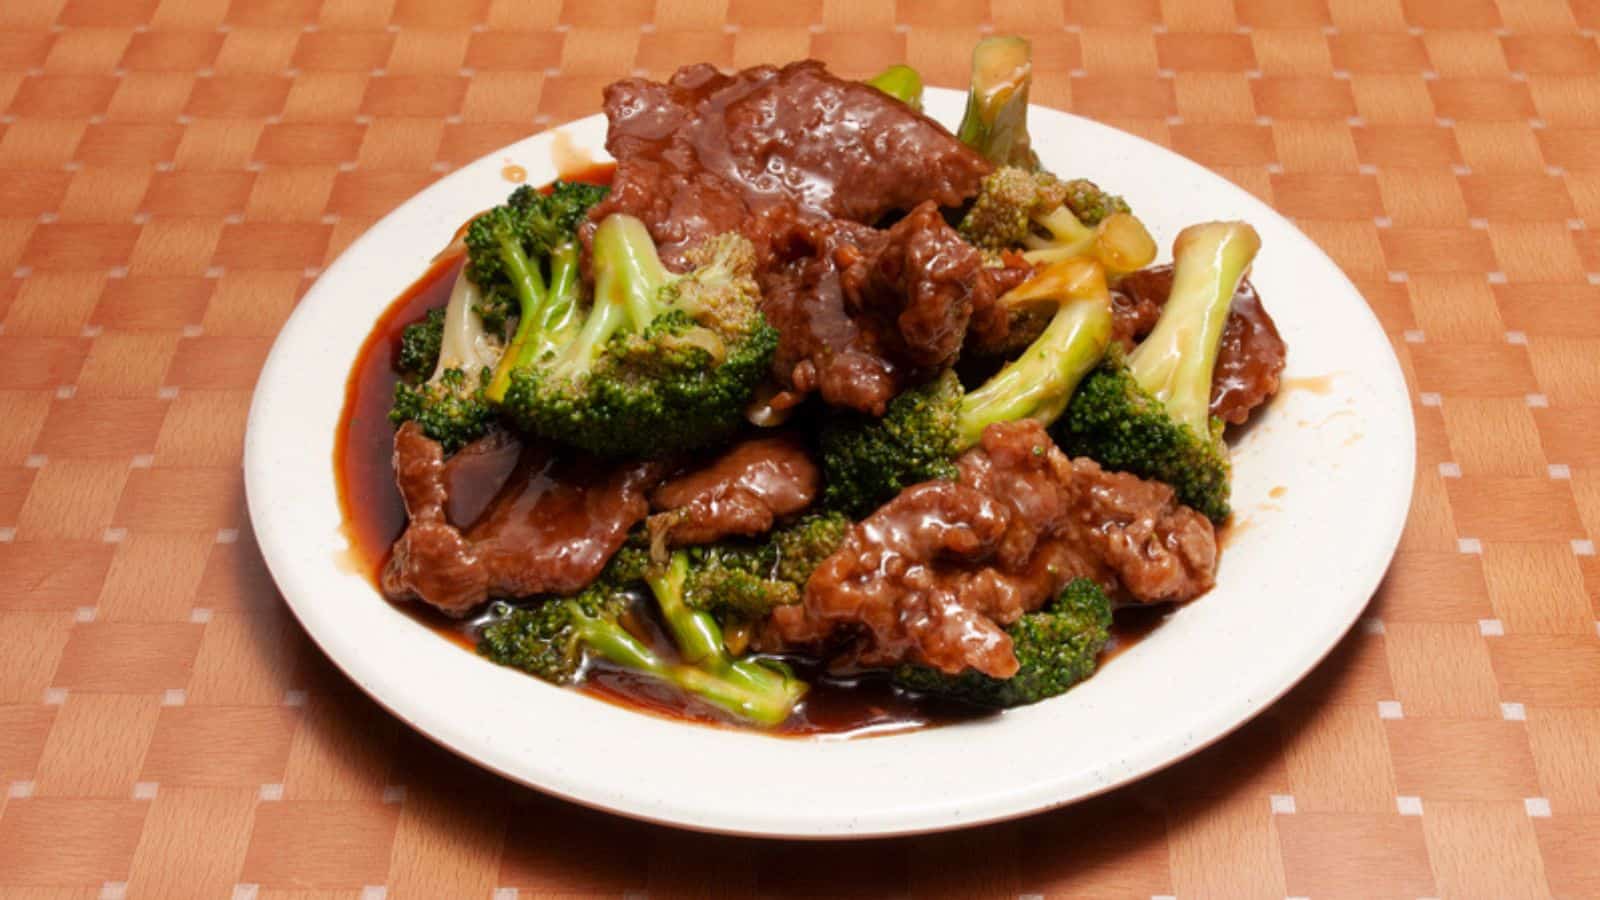 Authentic and traditional Chinese dish known as beef with broccoli